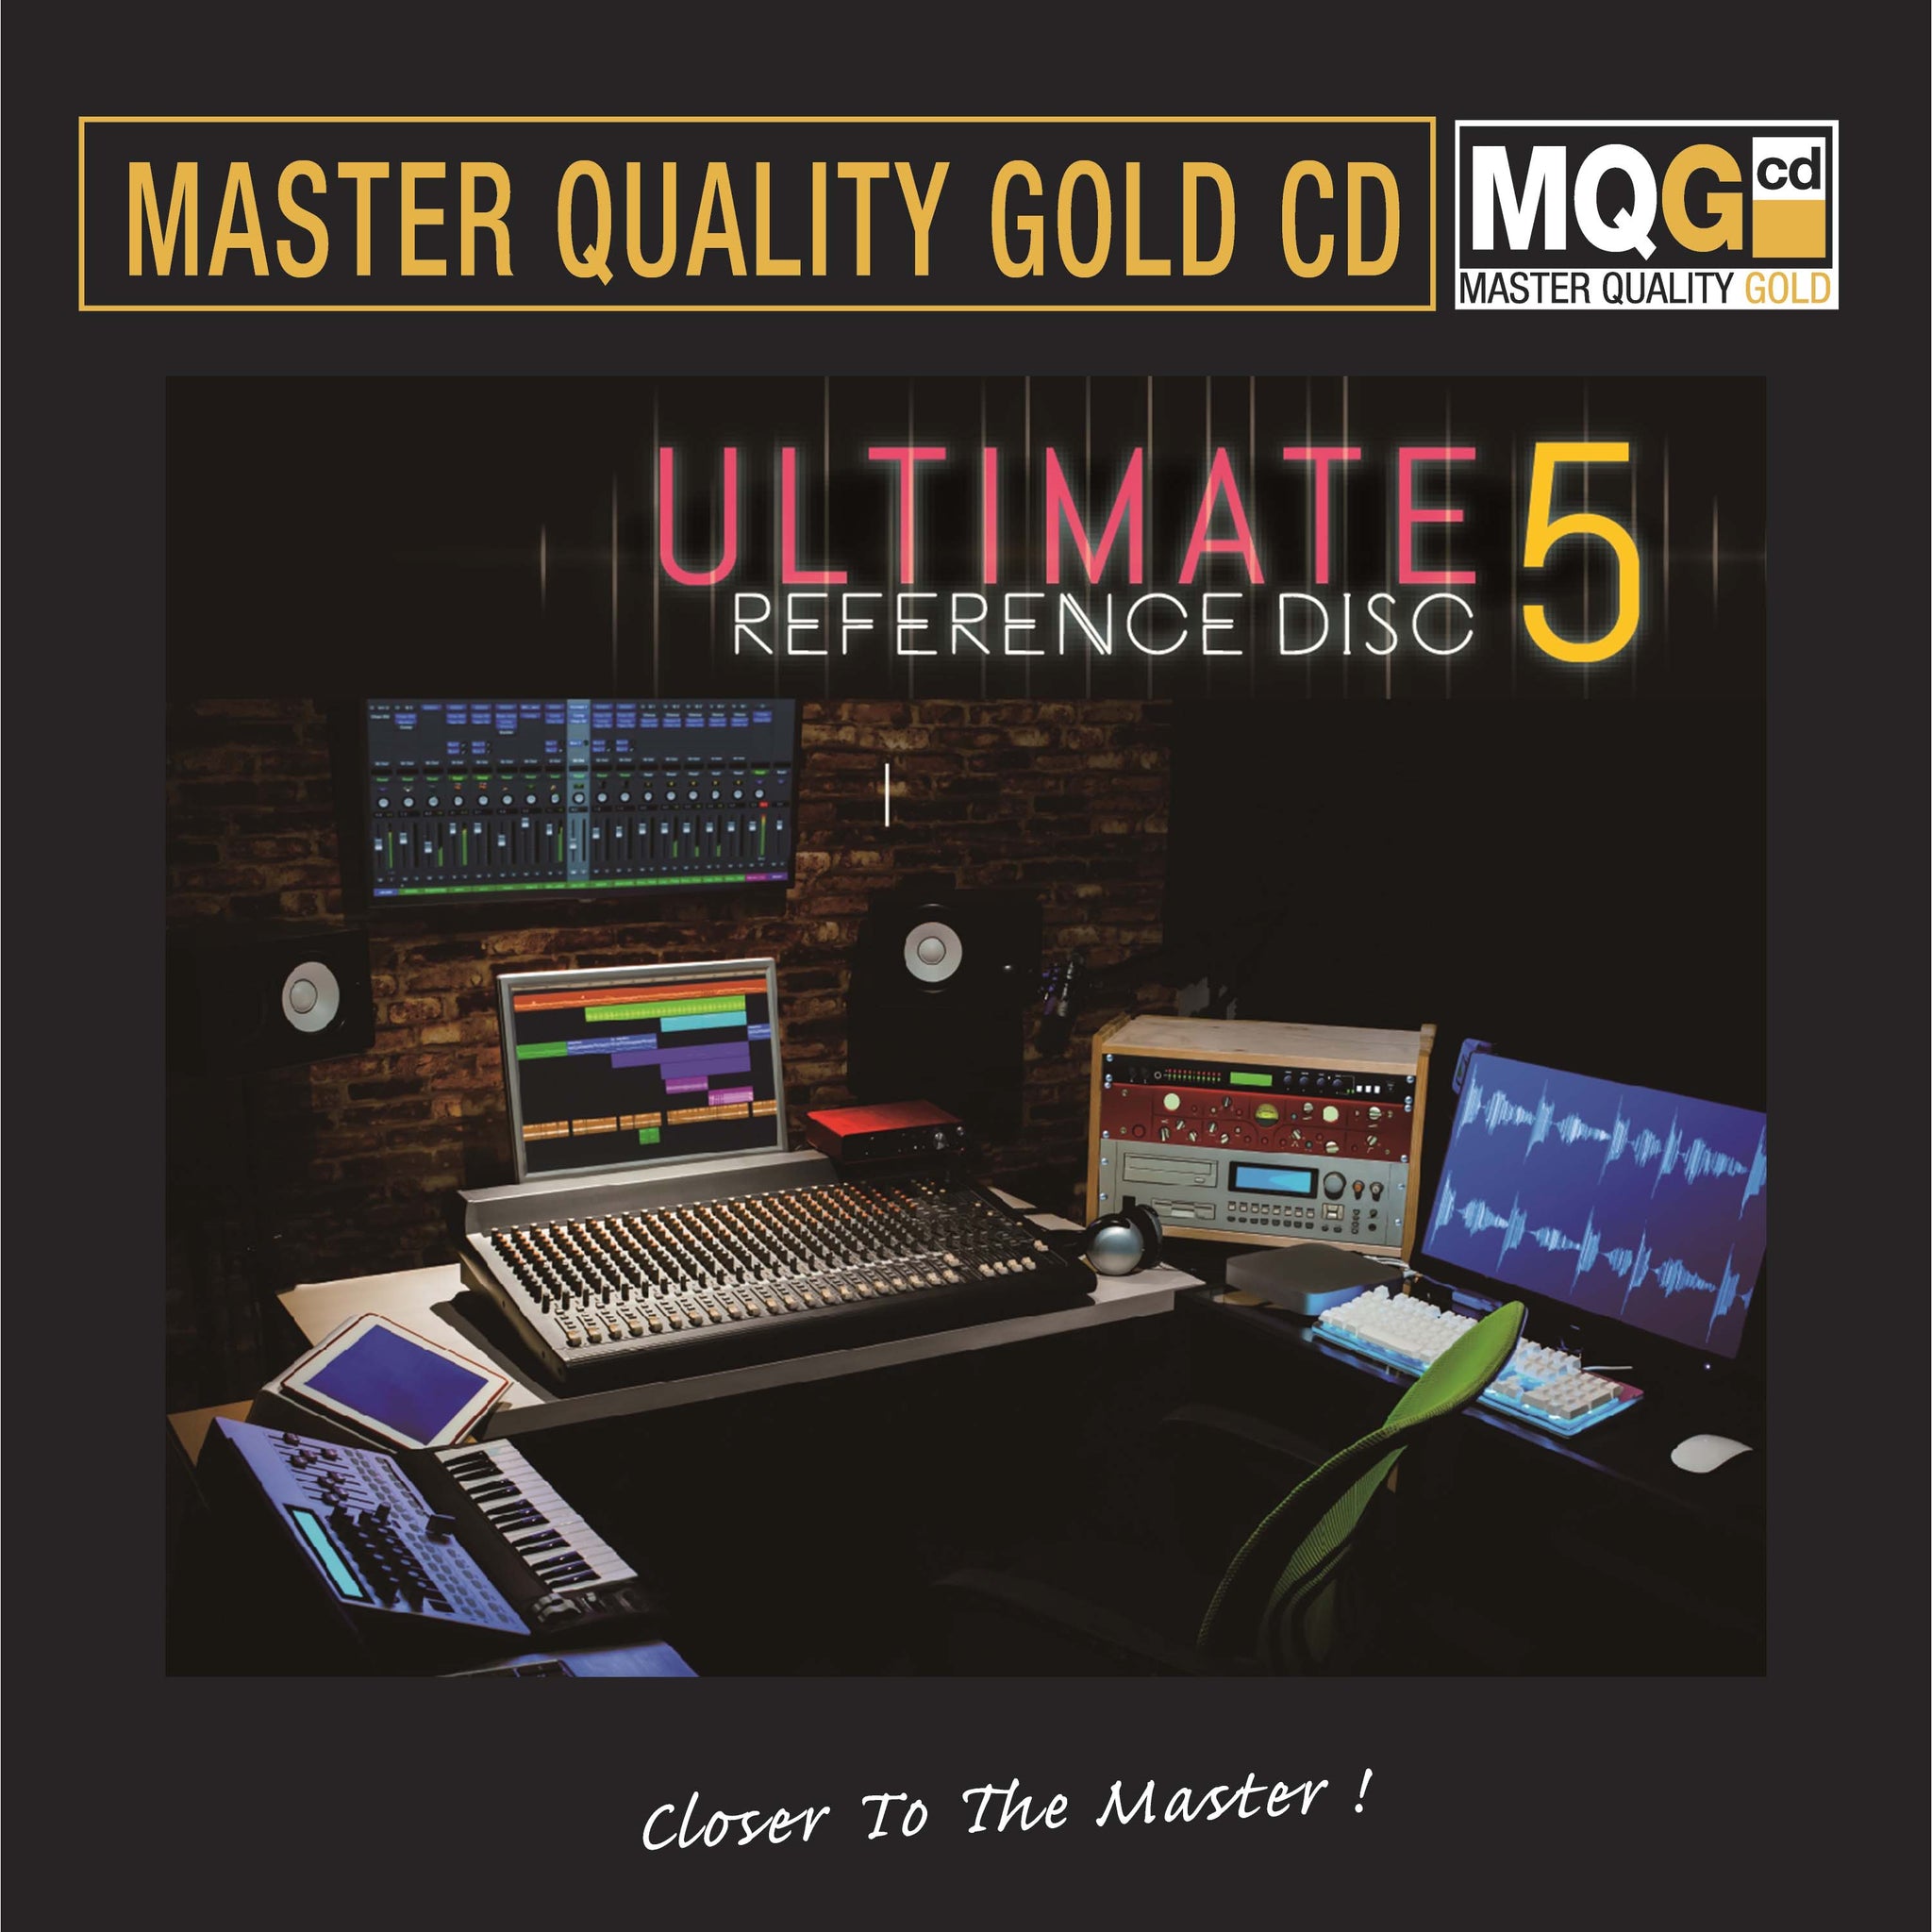 ULTIMATE REFERENCE DISC 5 - VARIOUS ARTISTS master quality (MQGCD) CD